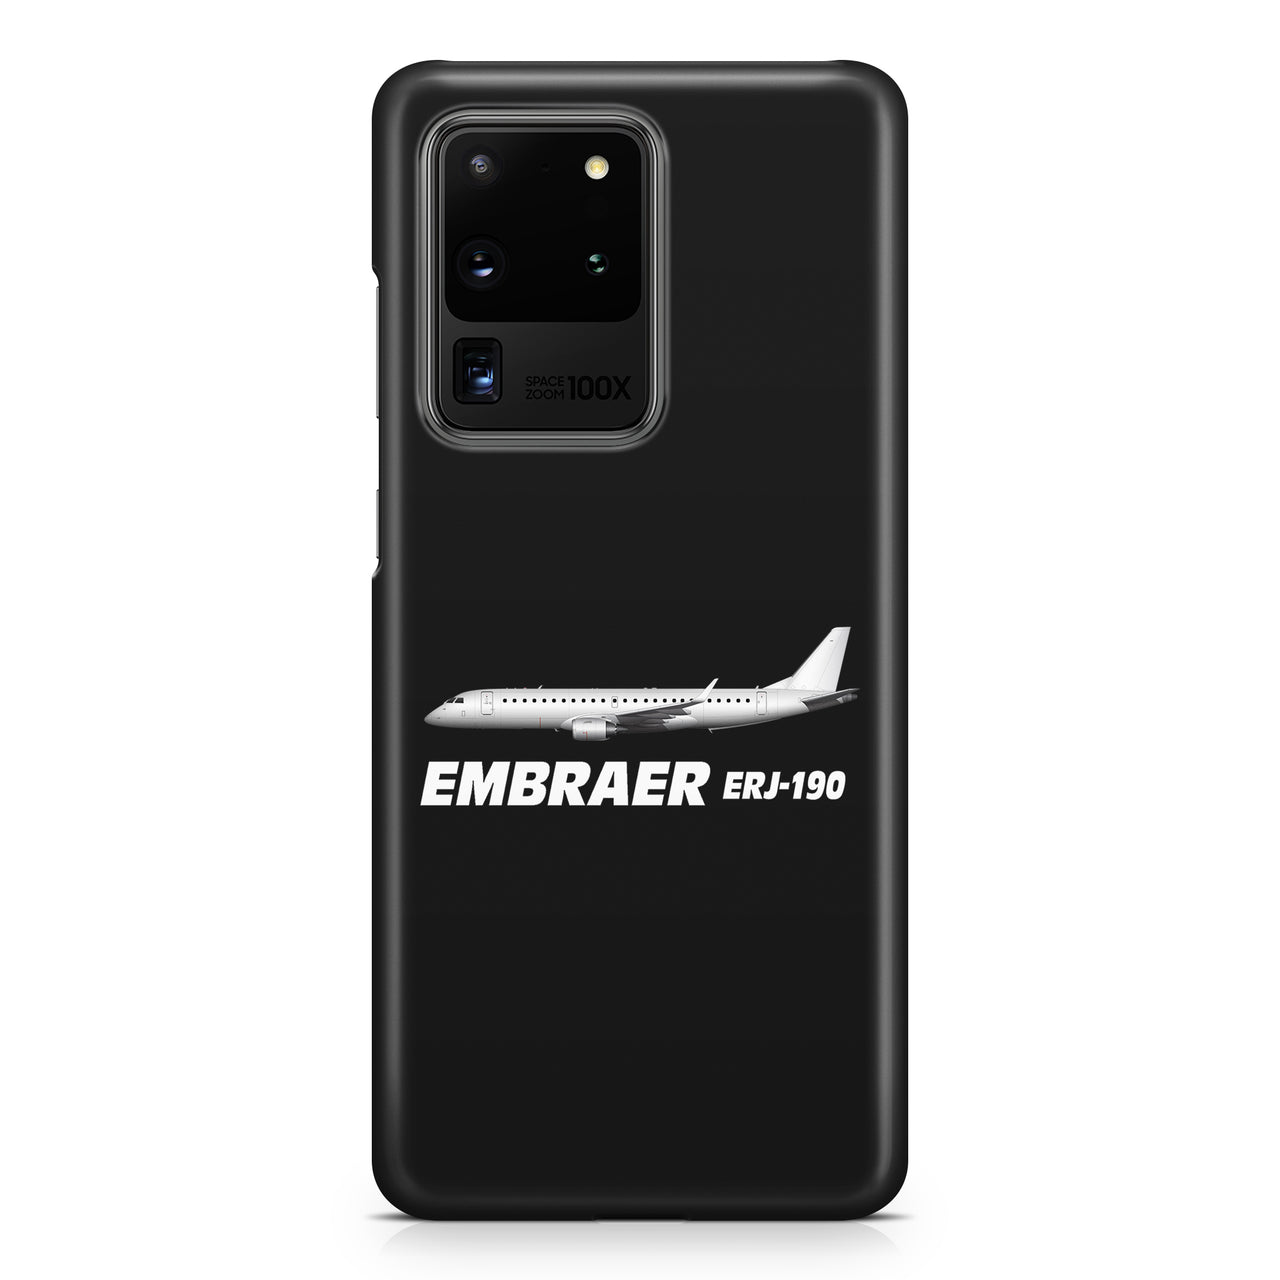 The Embraer ERJ-190 Samsung S & Note Cases